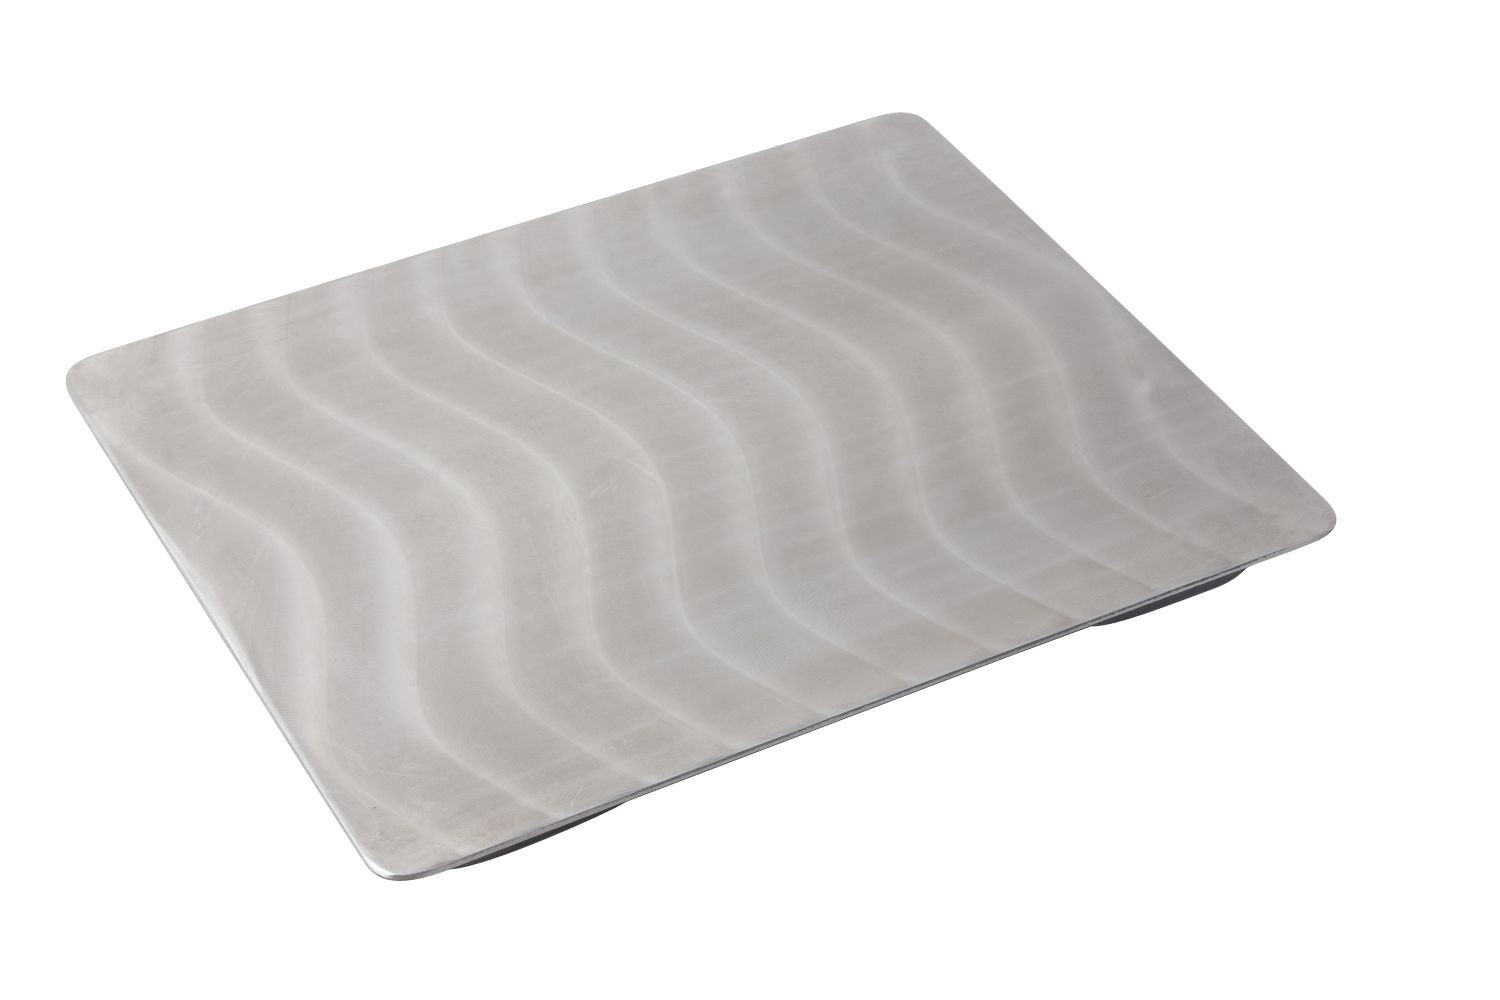 Bon Chef 52106 EZ Fit Stainless Steel Half Size Tile with Swirls, 12 3/4" x 10 3/8"